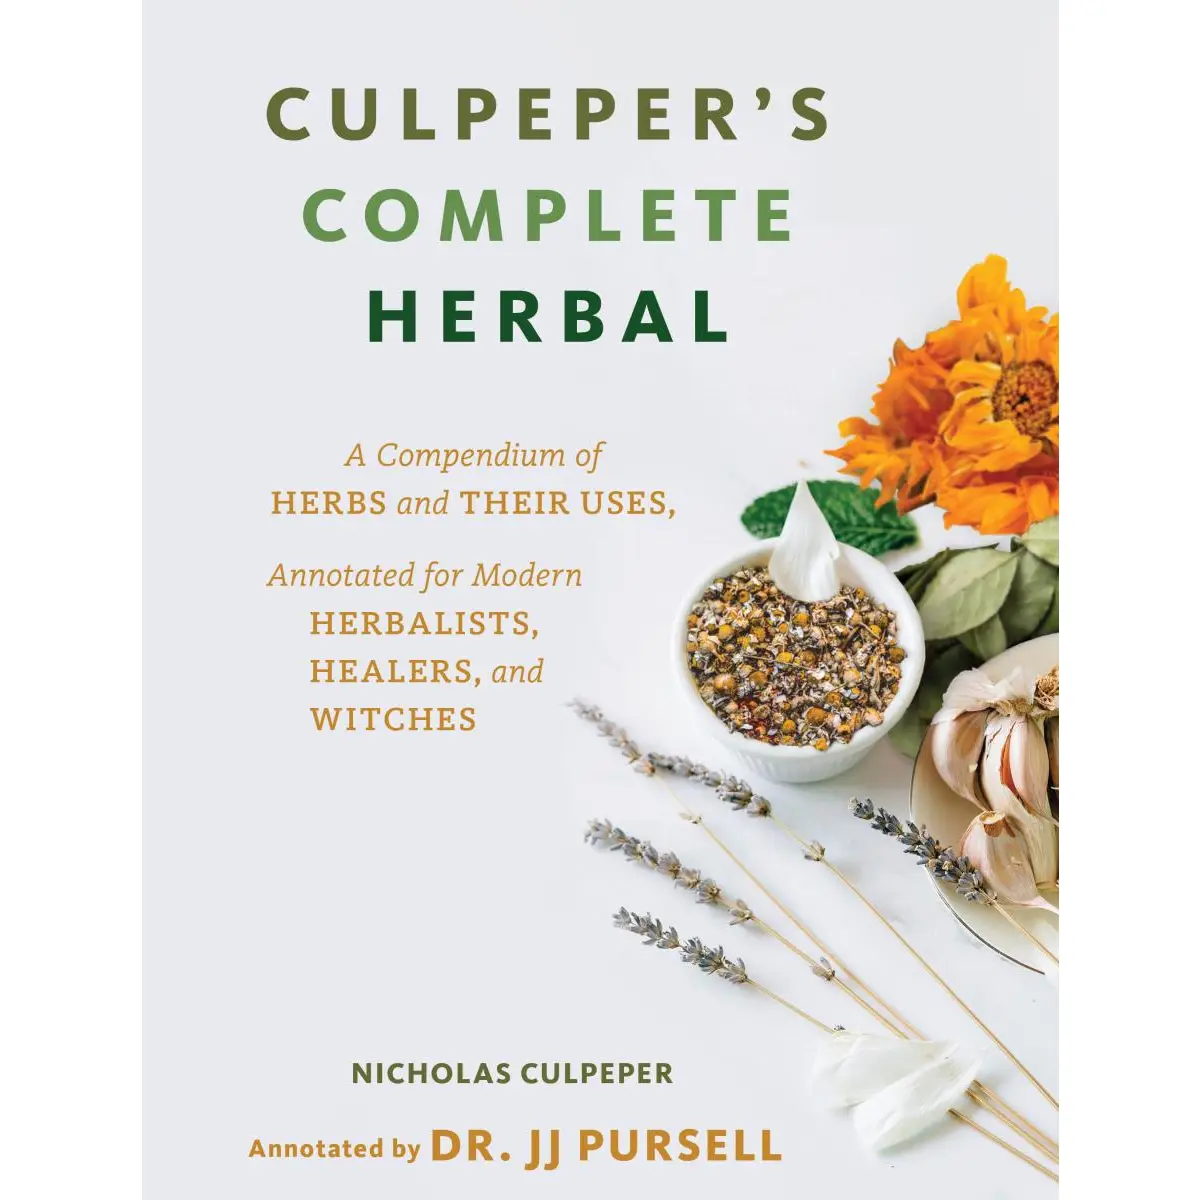 Culpepper's Complete Herbal : Herbalists, Healers & Witches